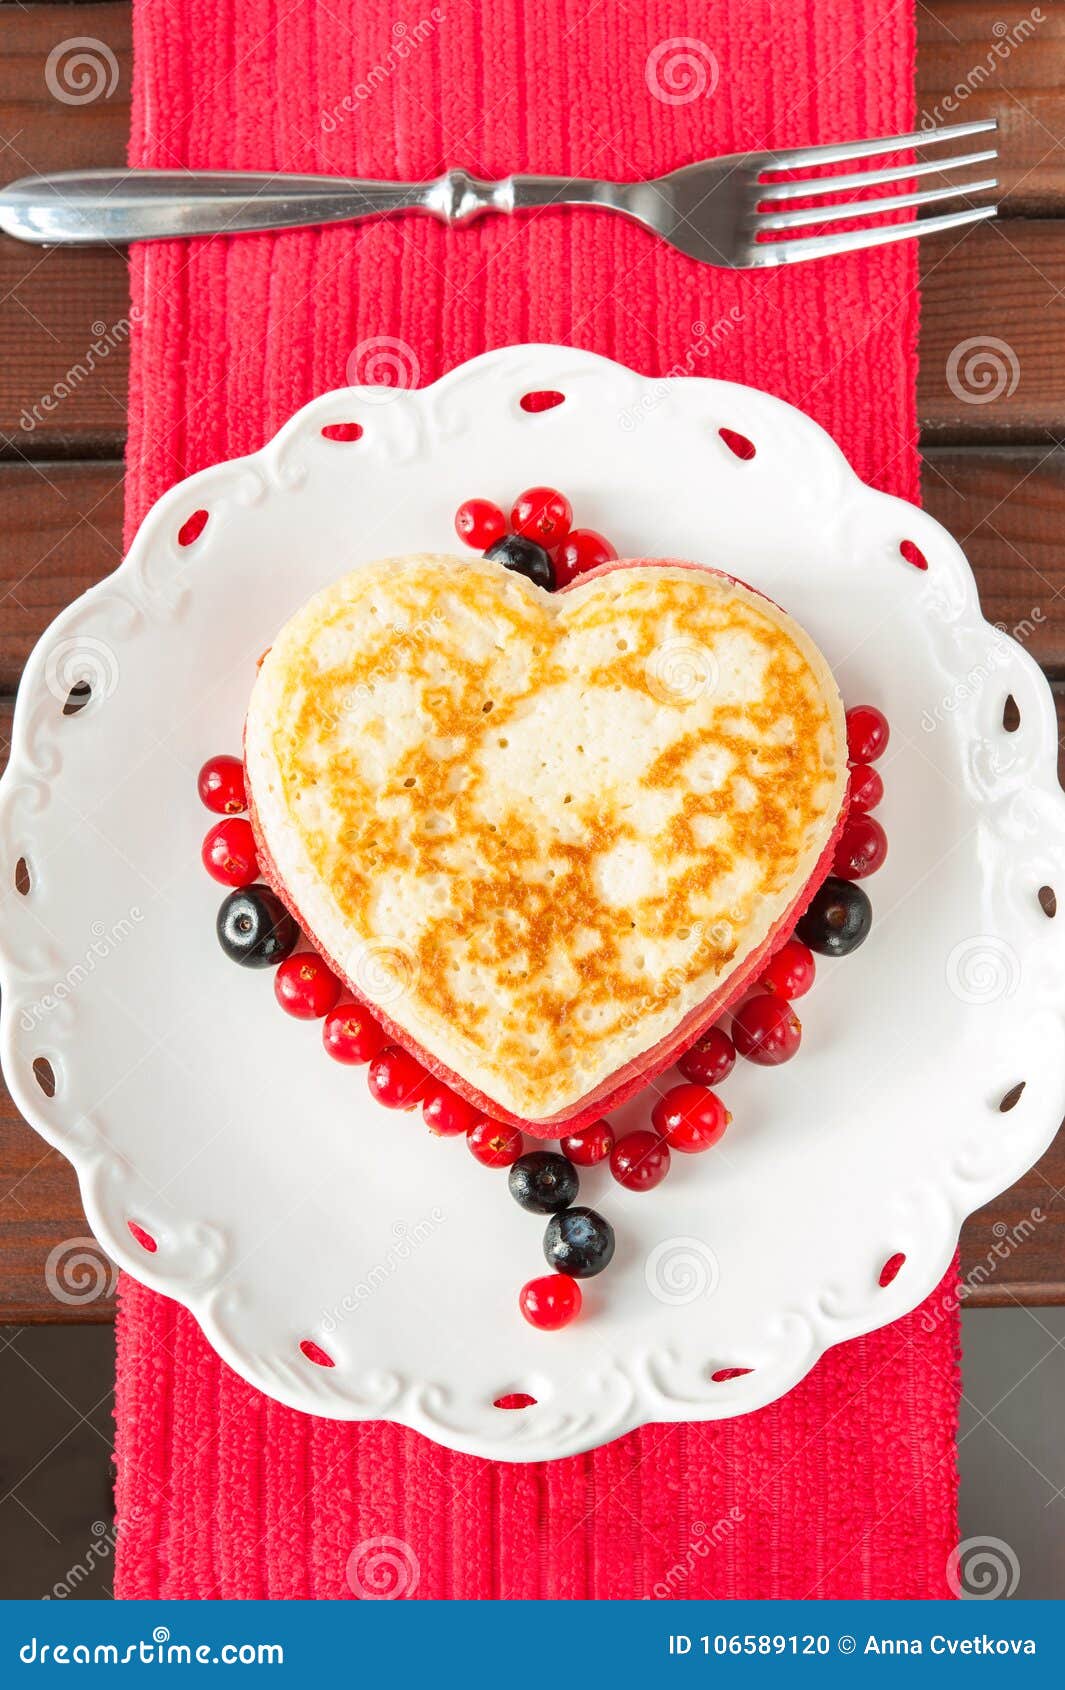 Time To Celebrate. Homemade Heart Shaped Pancakes with Berries Stock ...